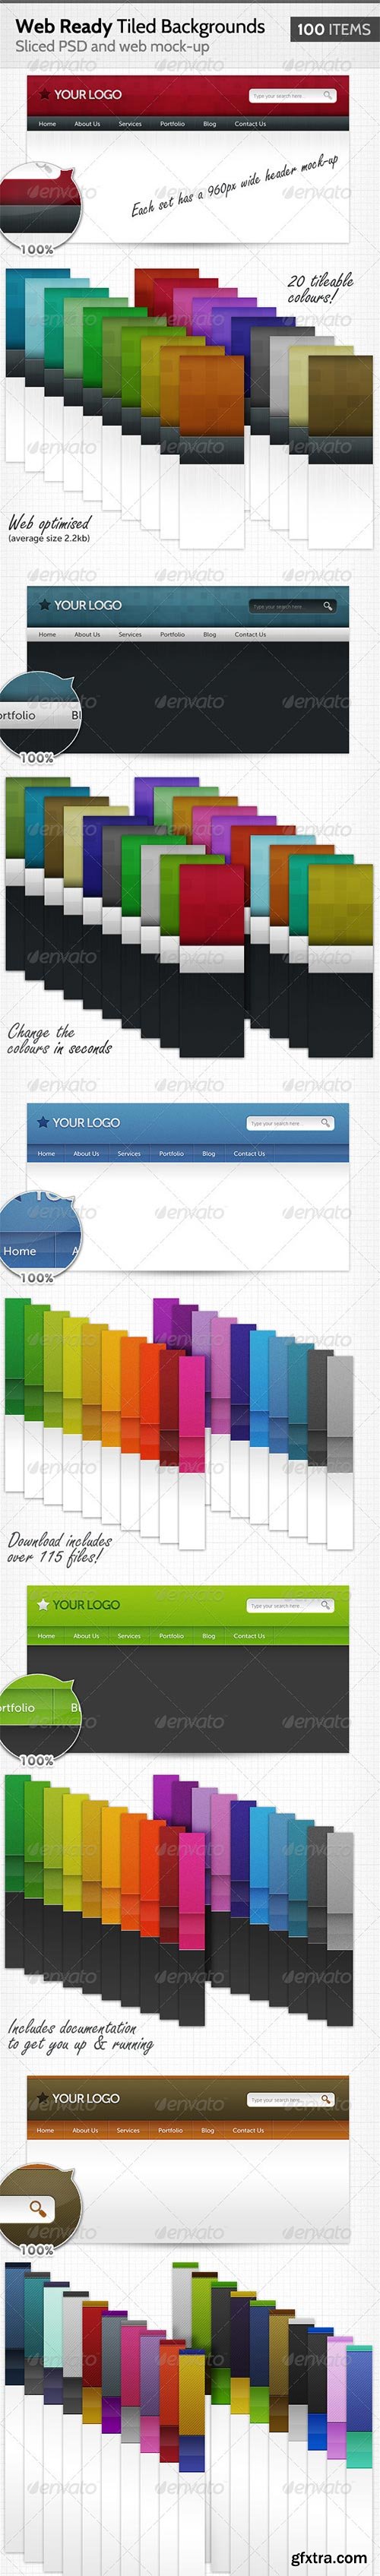 GraphicRiver - 100 Web Ready Tiled Backgrounds